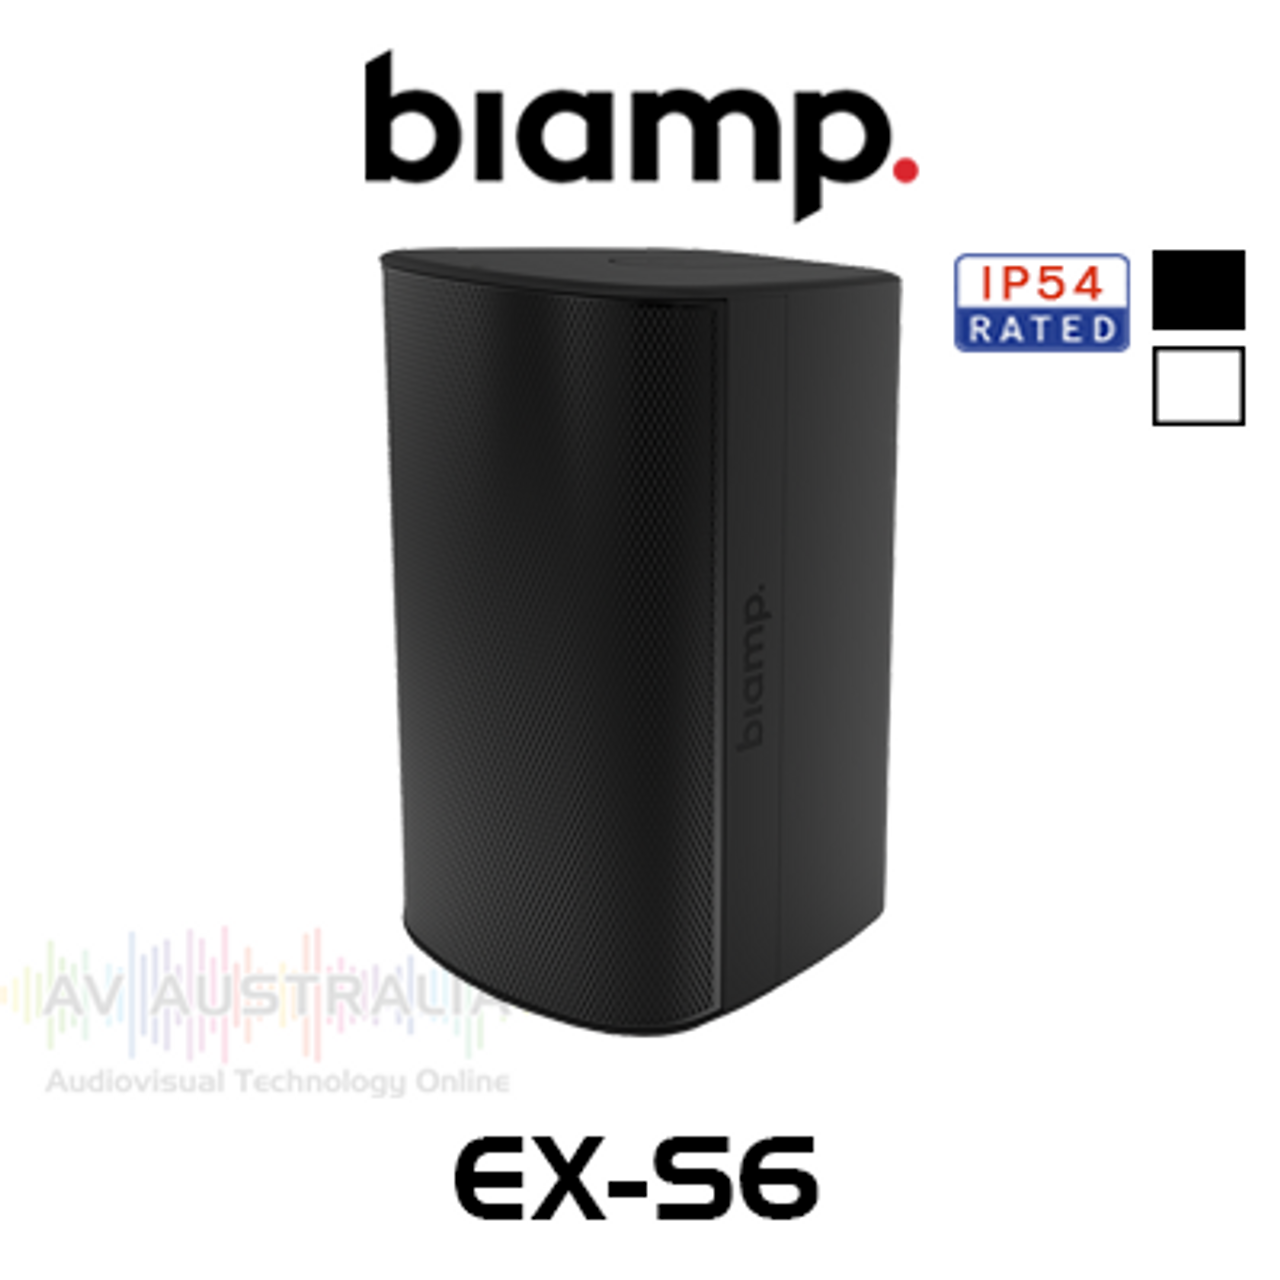 Biamp Desono EX-S6 6.5" 70/100V Coaxial Surface Mount Outdoor Loudspeaker (Each)